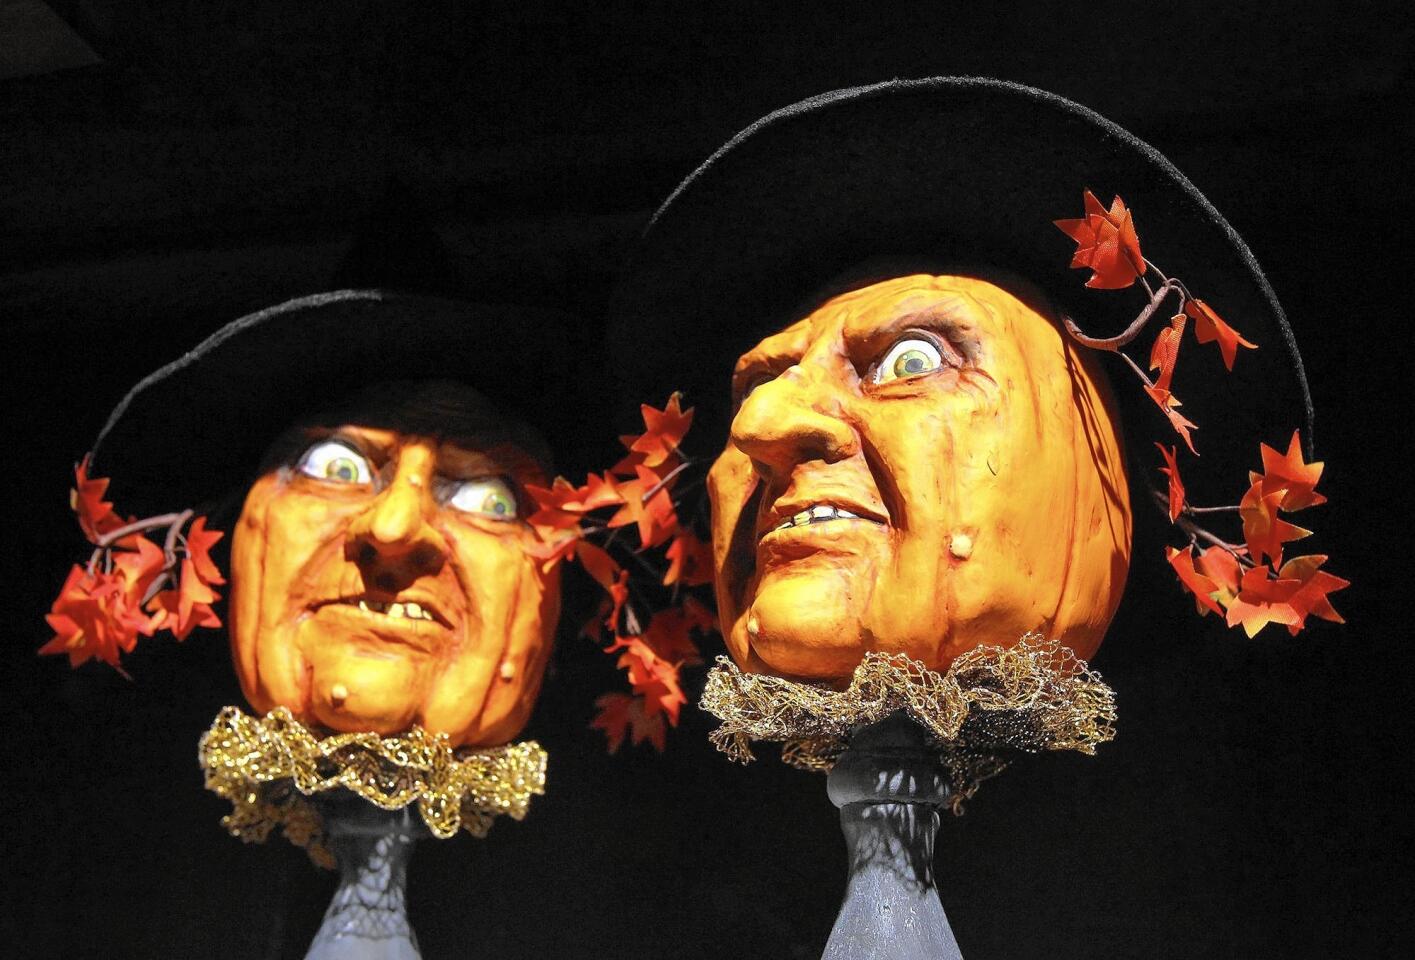 Two creepy scarecrow pumpkins by artist Sylver on display at the Roger's Gardens annual Halloween boutique.